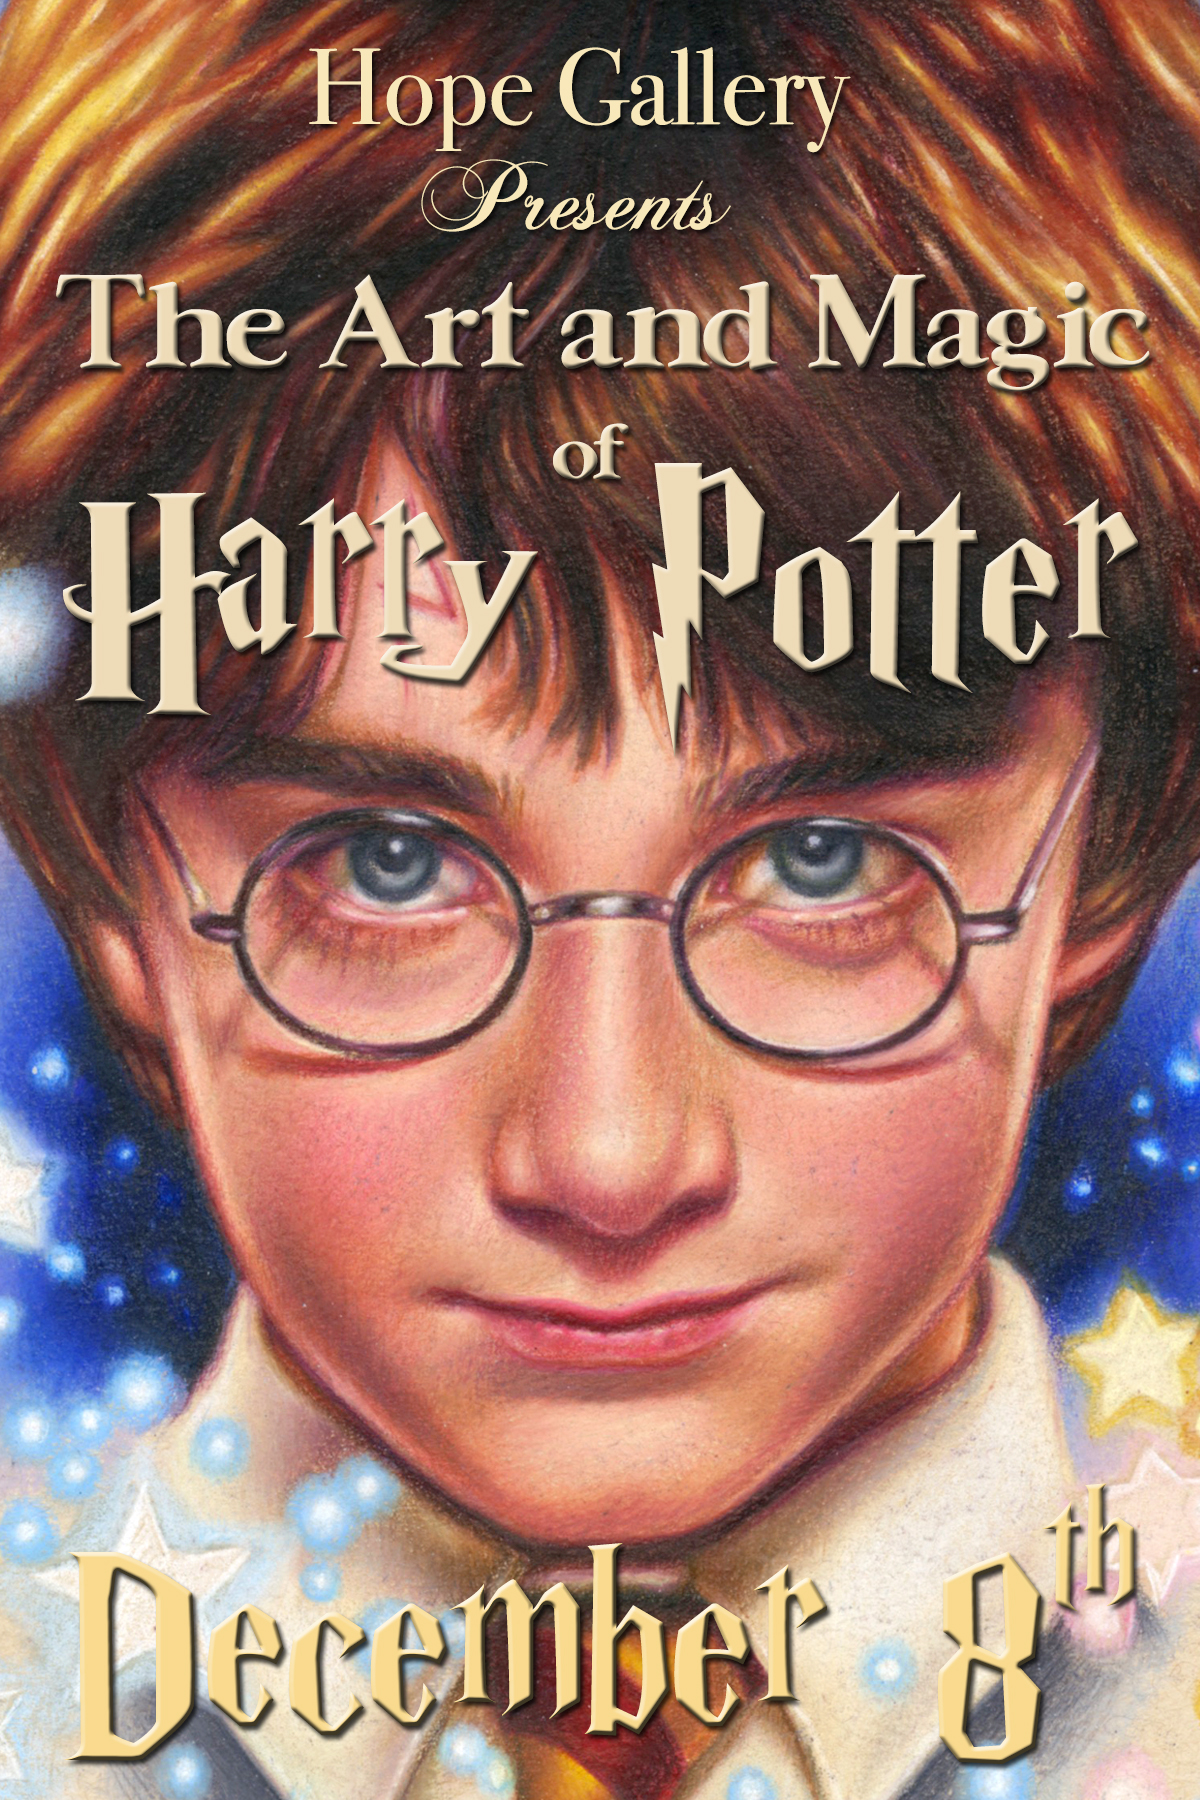 Hope Gallery presents "The Art and Magic of Harry Potter ...